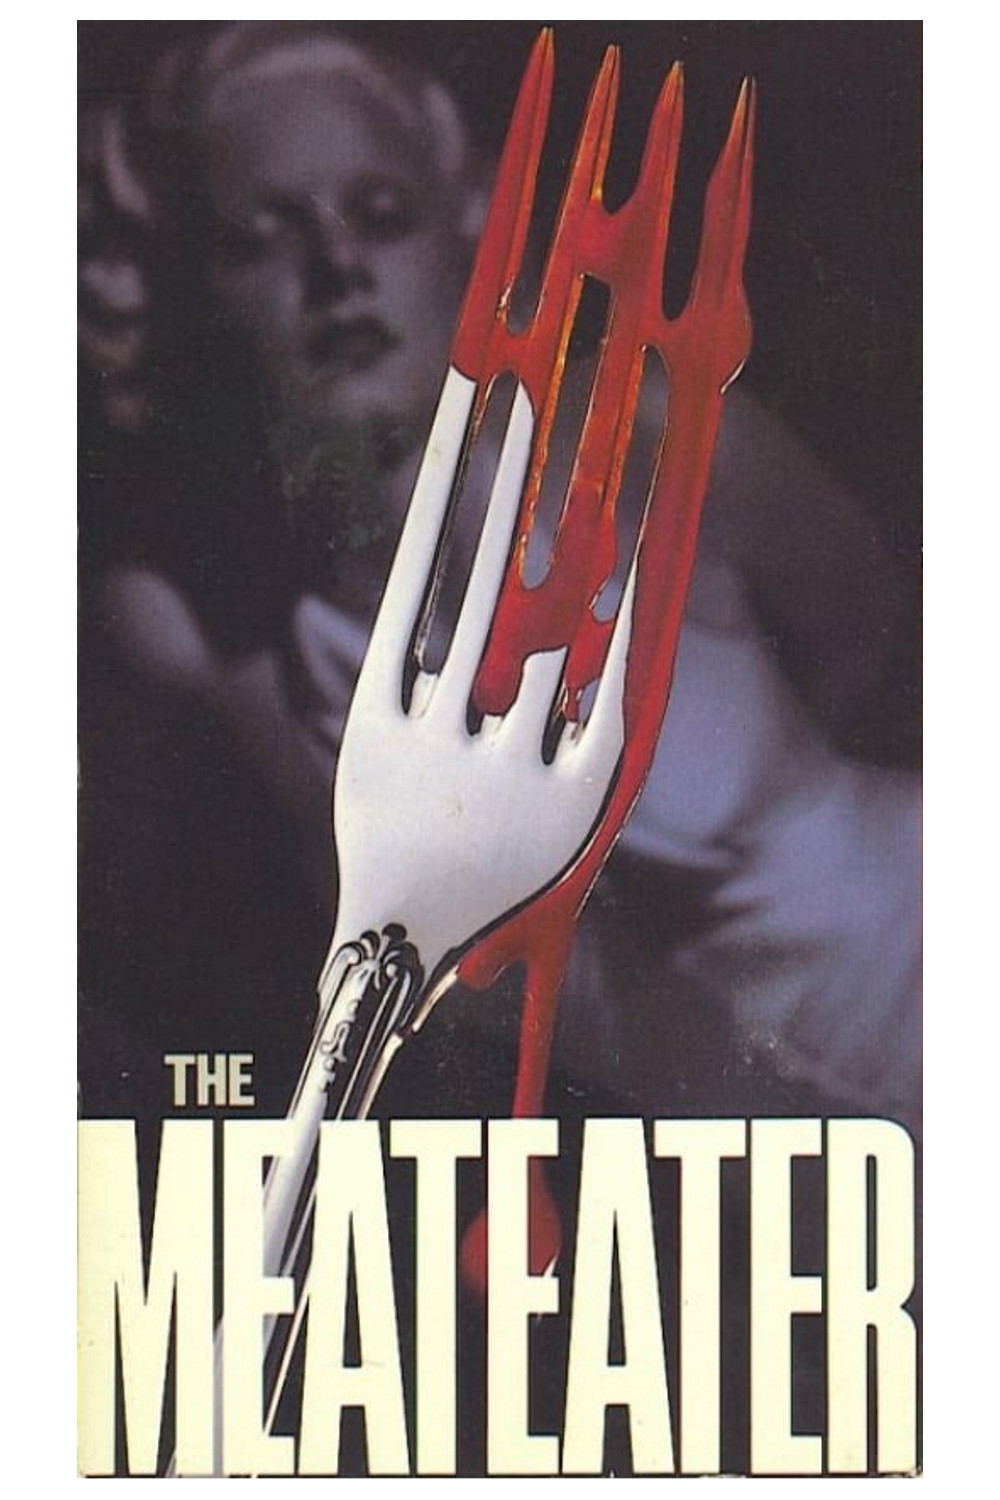 The Meateater (1979) Poster